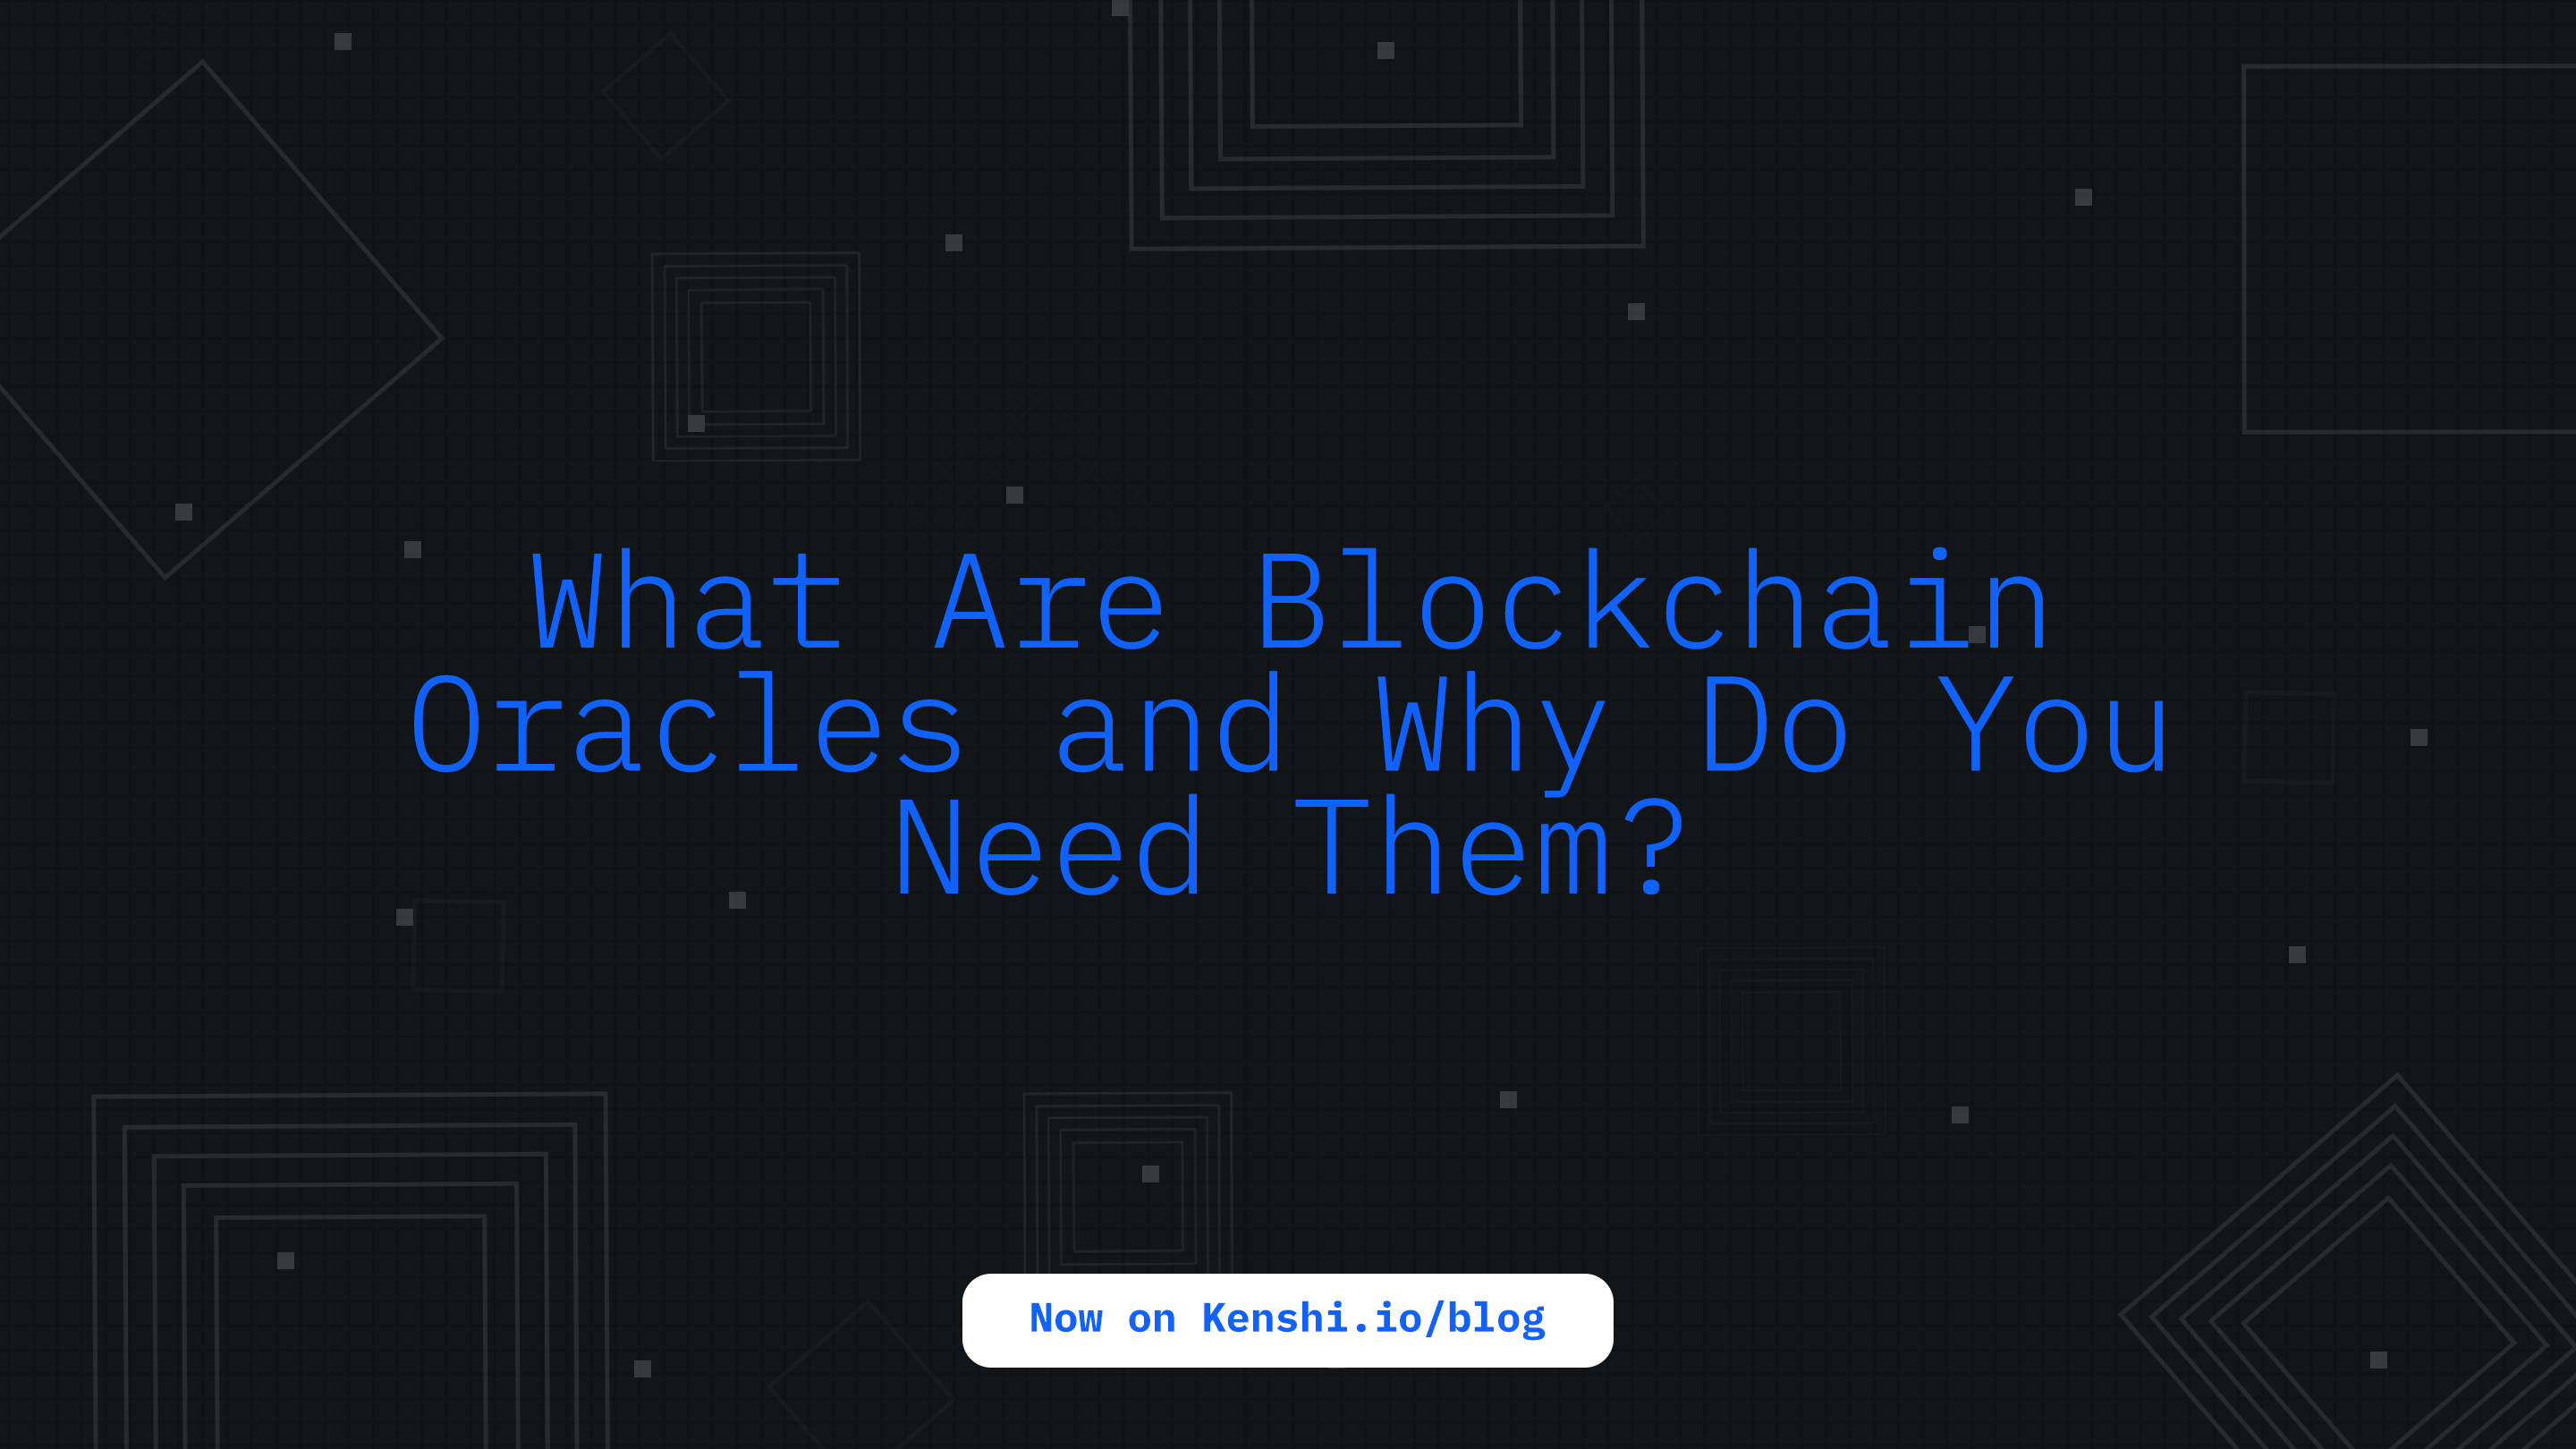 What Are Blockchain Oracles and Why Do You Need Them?